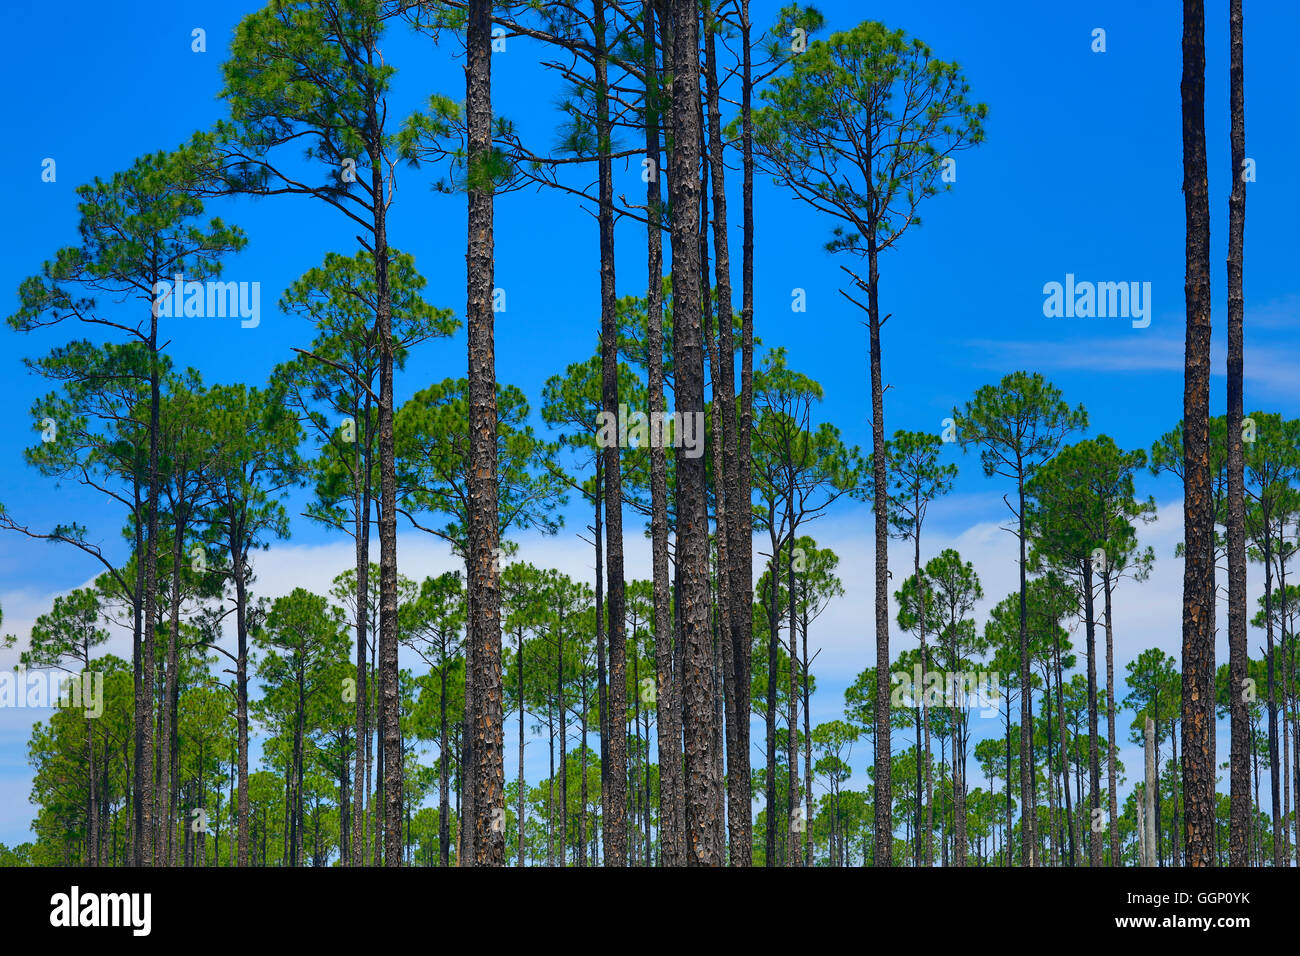 LOBLOLLY PINES are grown as a commercial crop - NORTHERN, FLORIDA Stock Photo